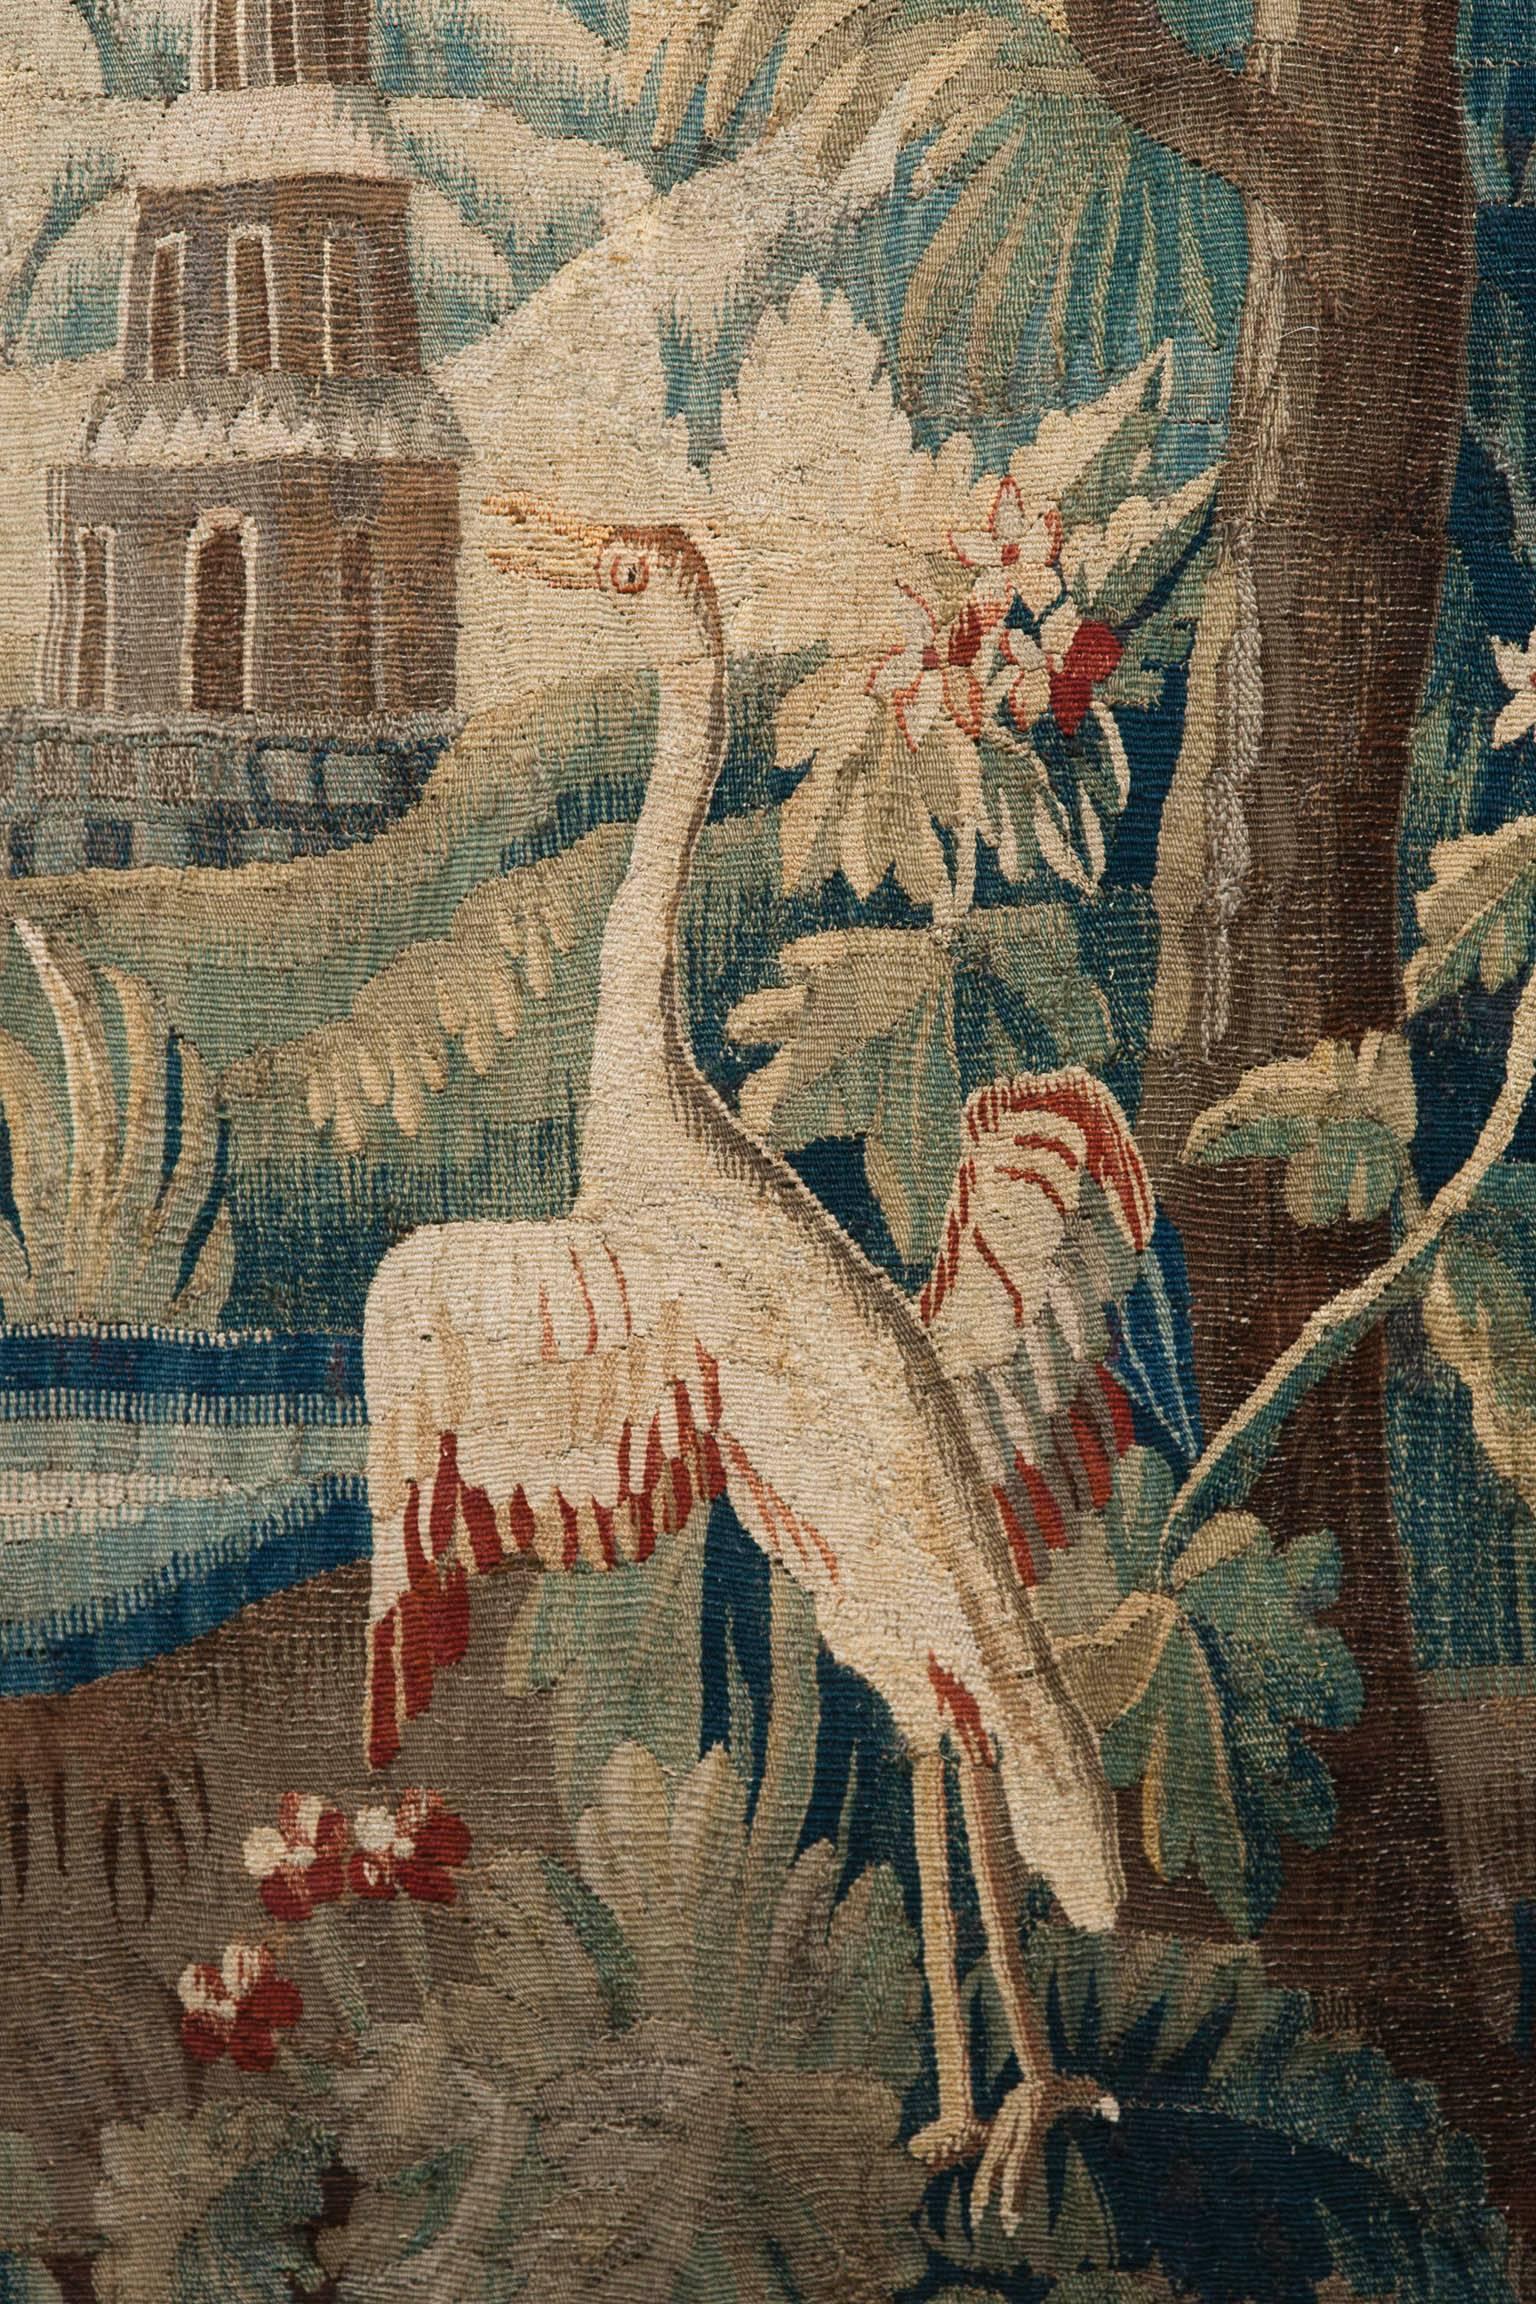 With two exotic birds, a fruit tree and a pagoda in the distance.
France, late 18th century in the chinoiserie taste.

Woven in wool and silk and backed in linen.
The tapestry has been cleaned, lightly restored and relined.